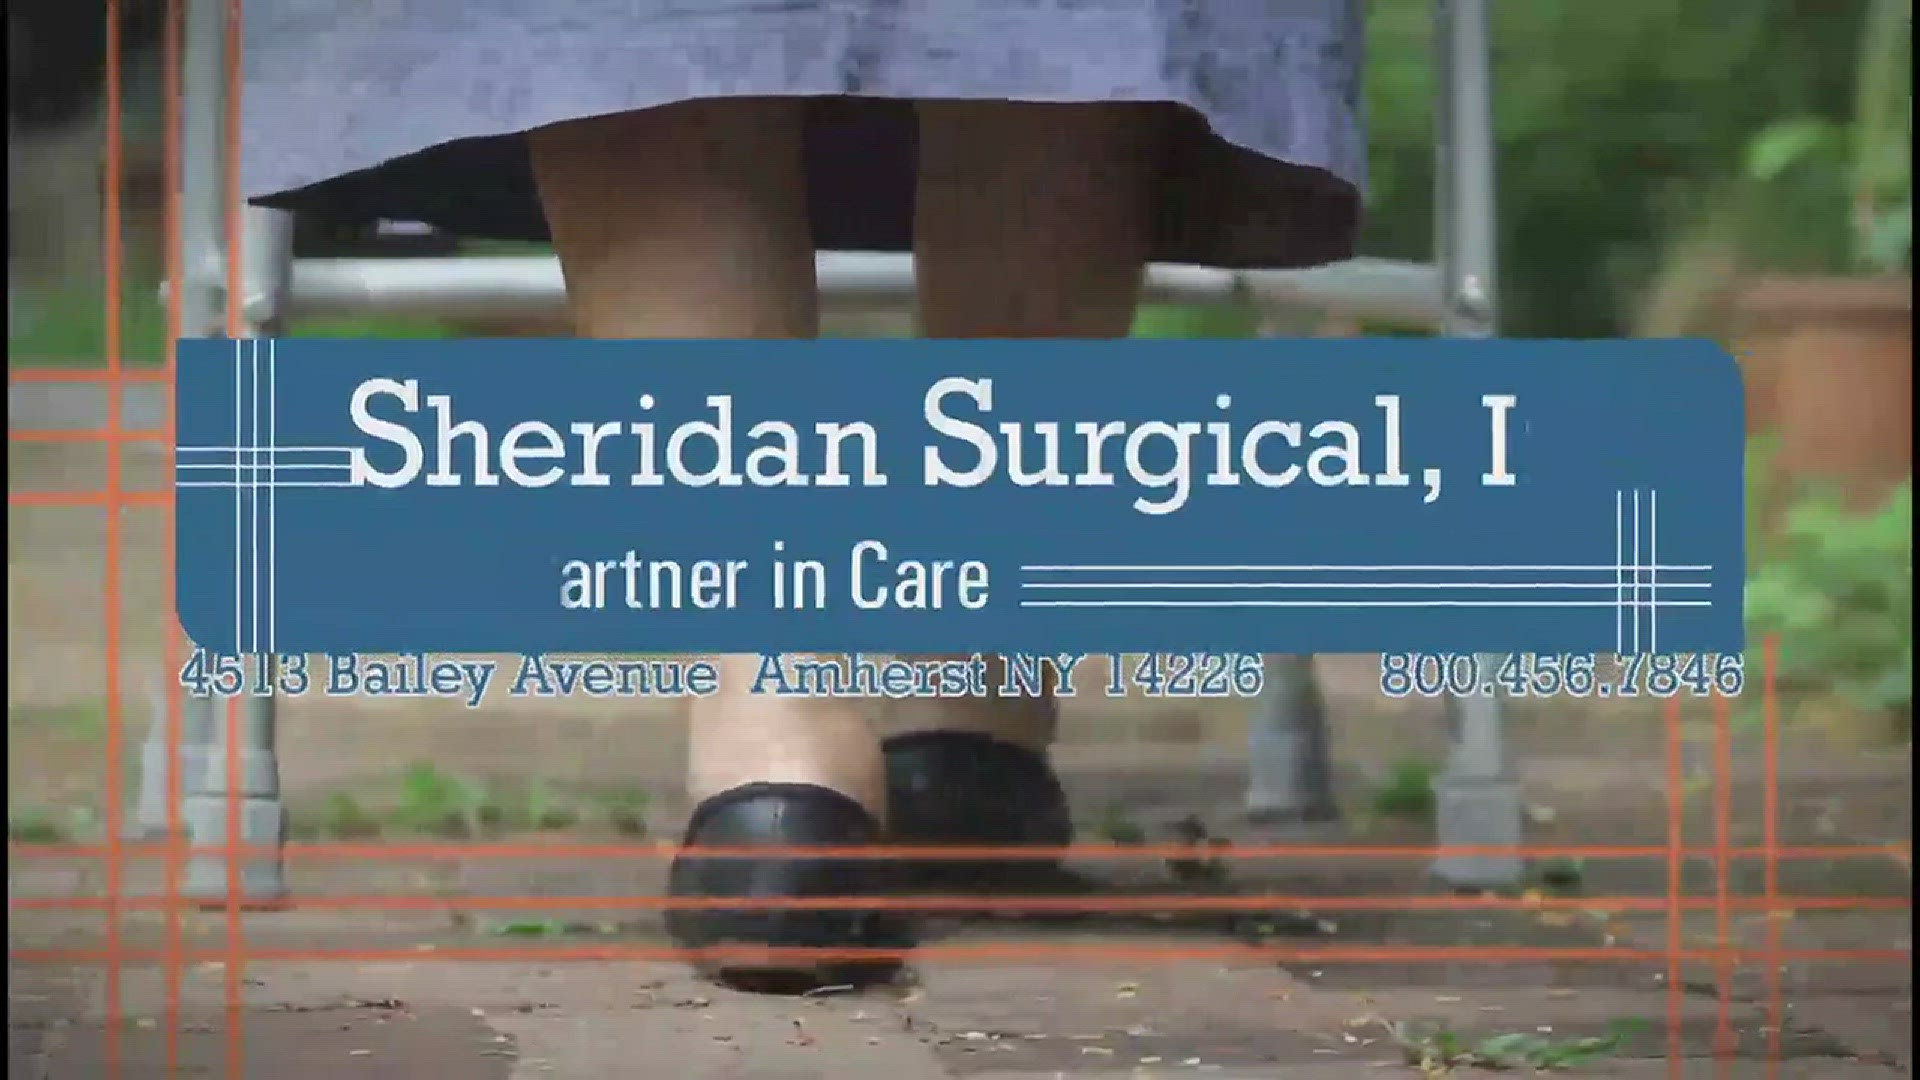 Sheridan Surgical - Your Partner in Care